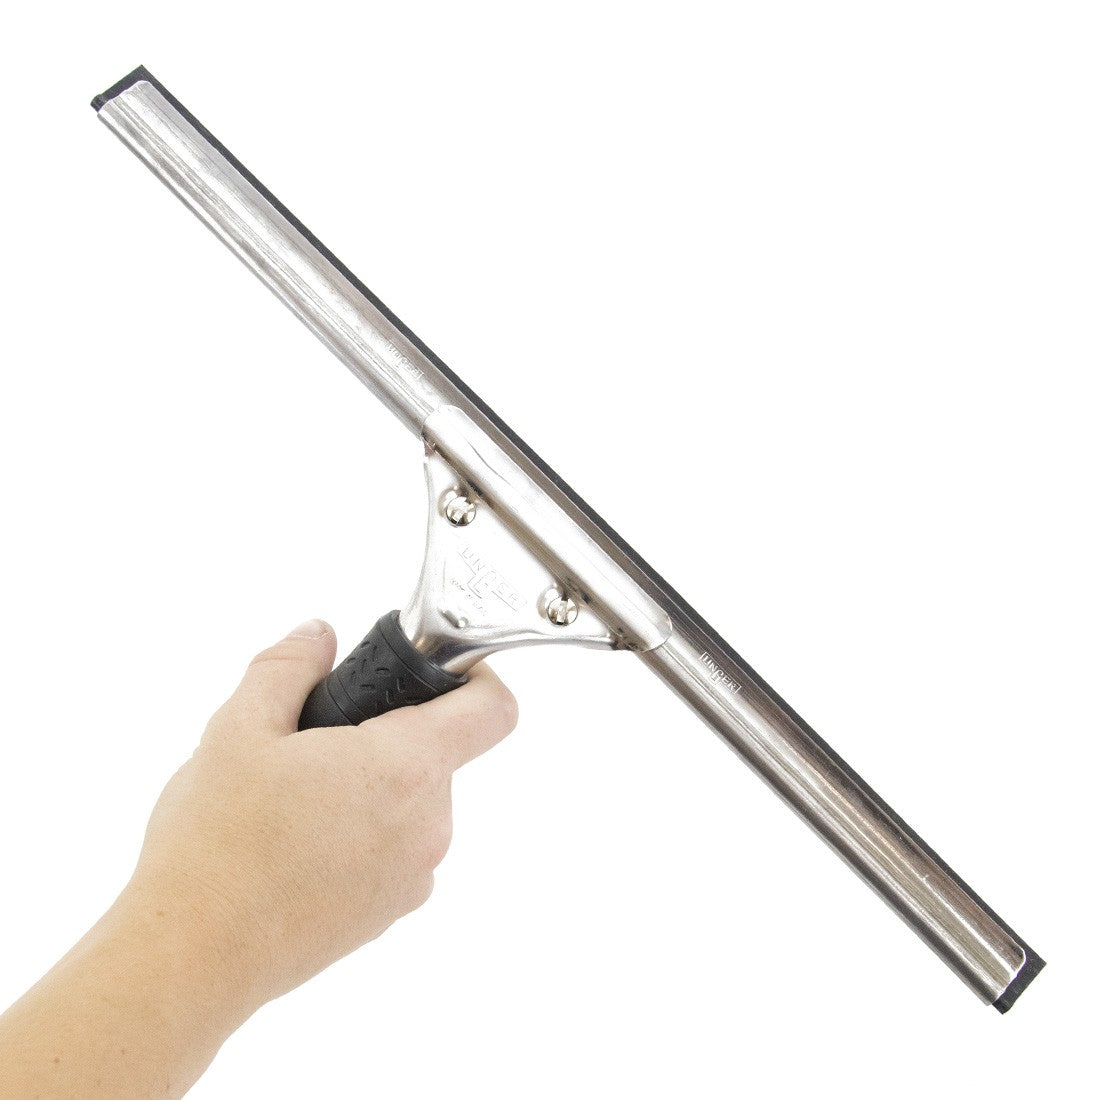 Unger Complete Pro Squeegee, Complete Squeegees